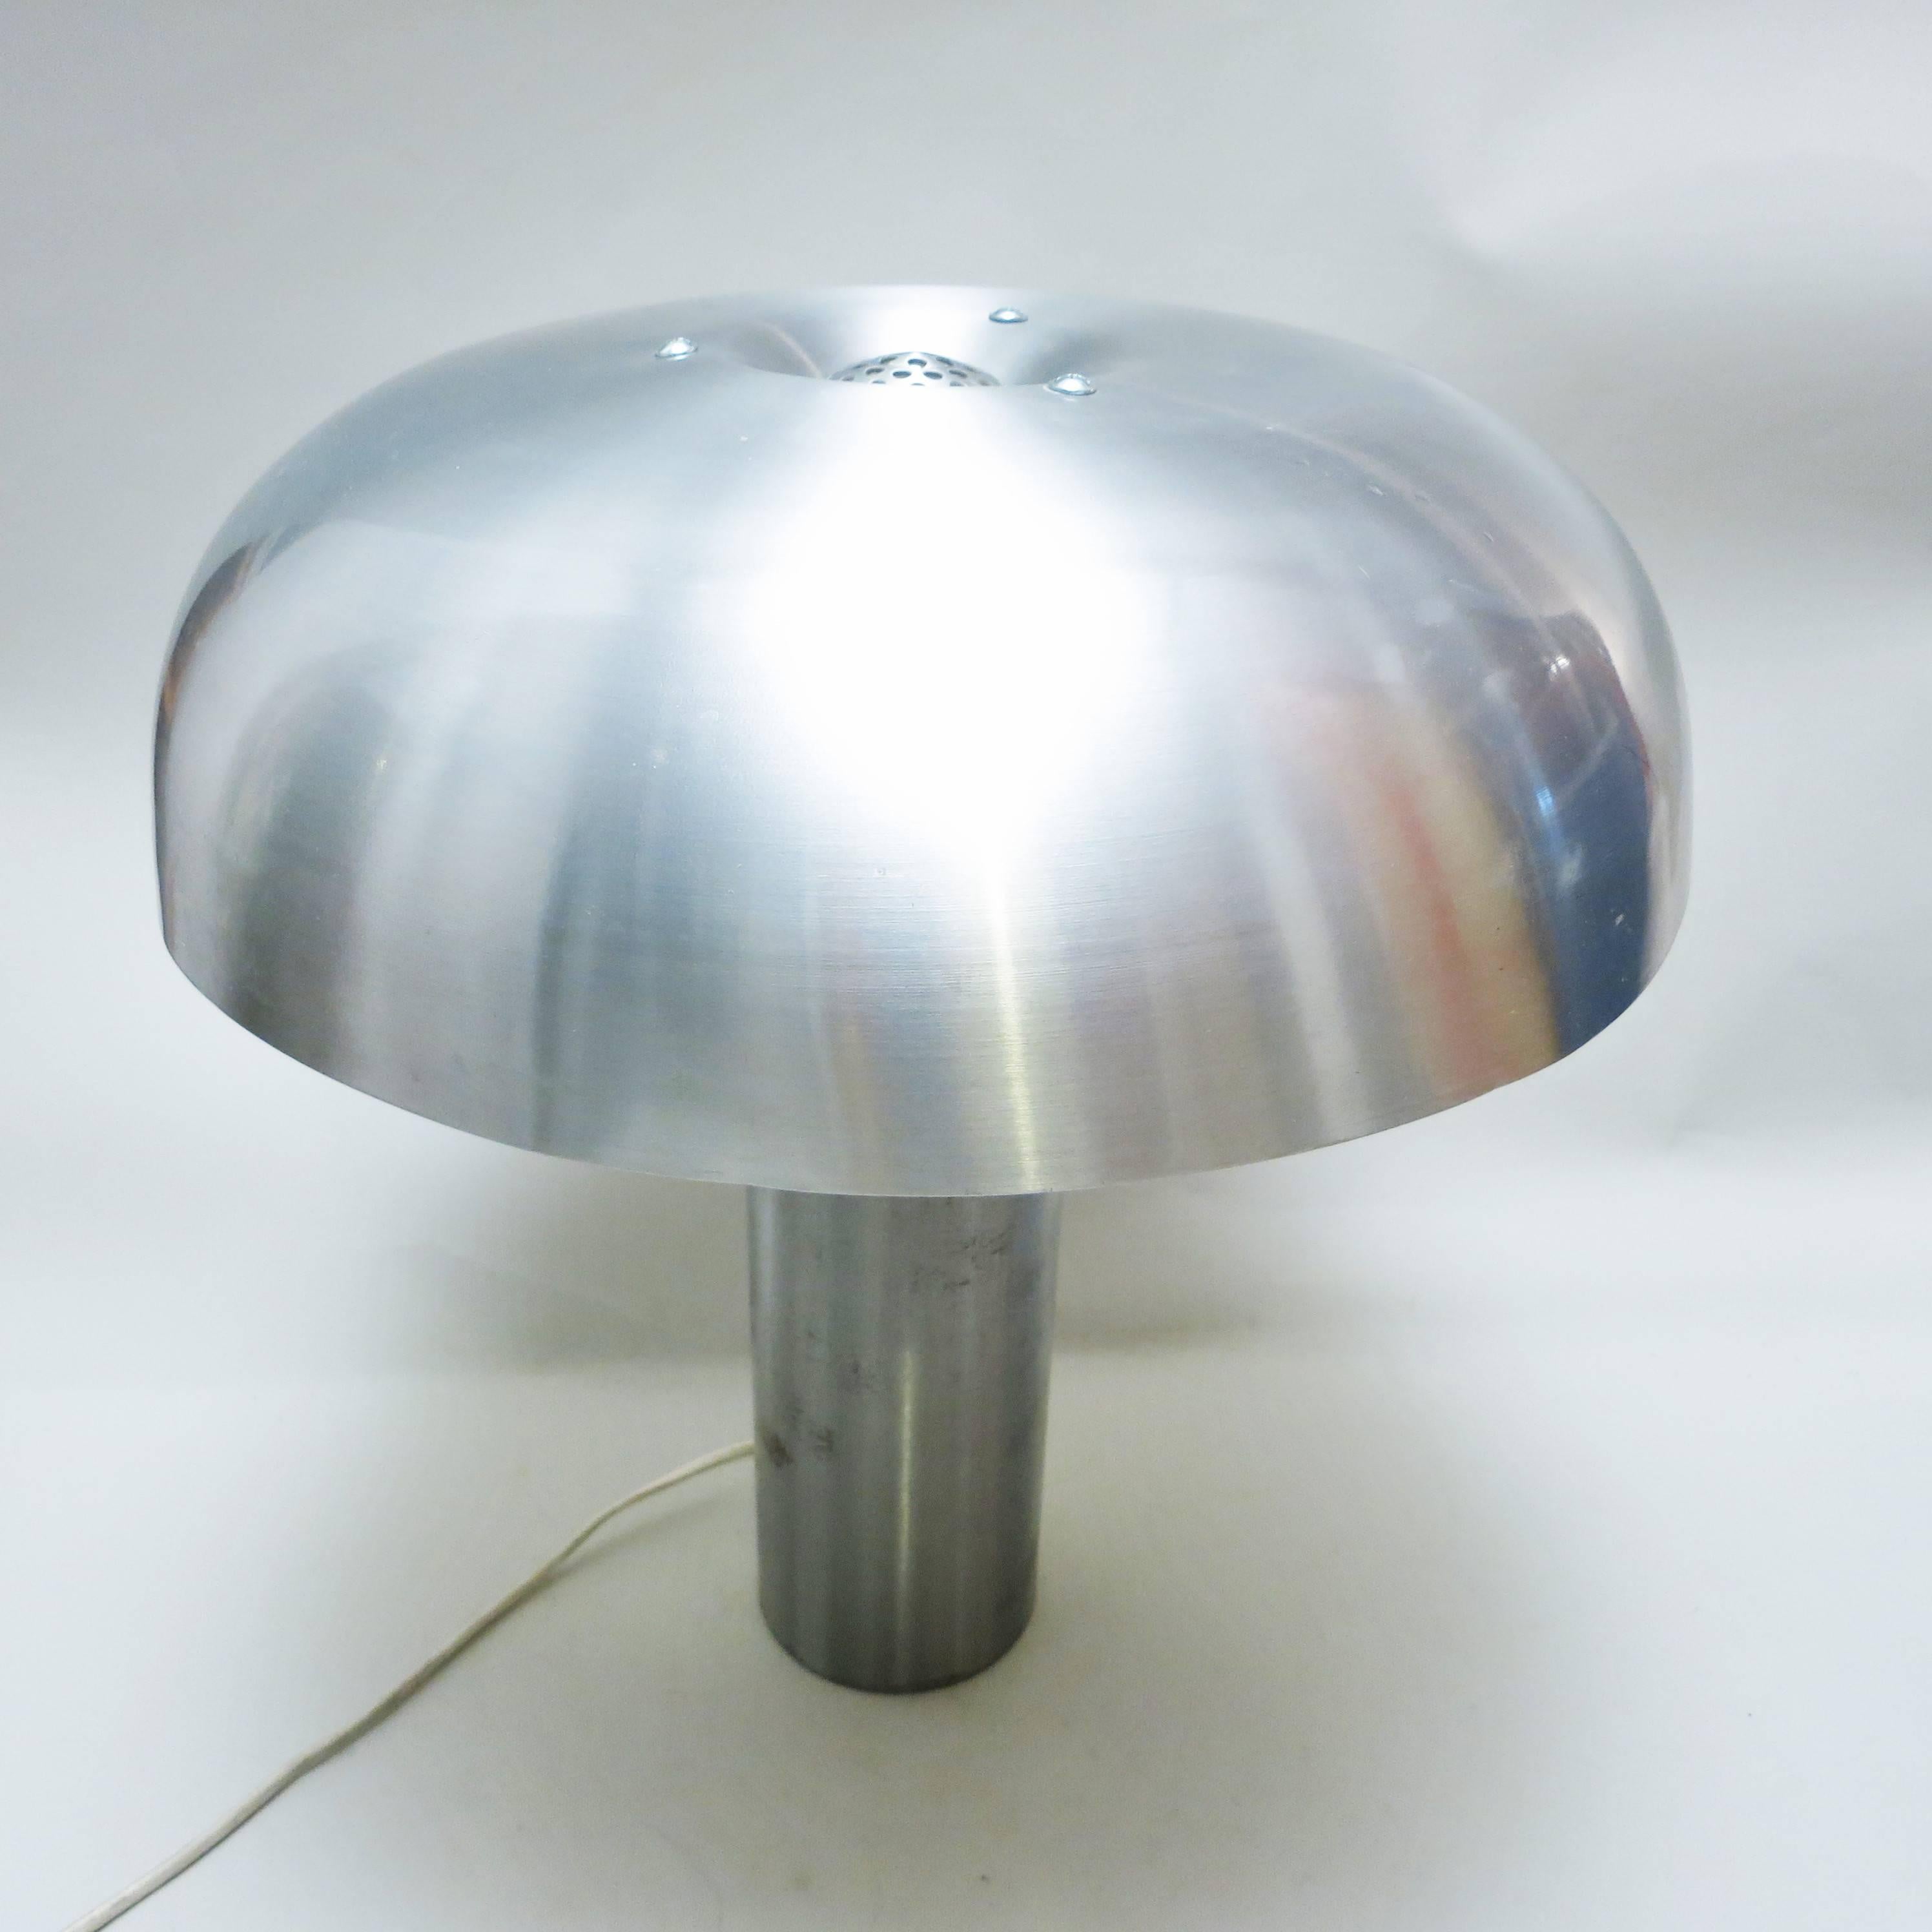 Large French Mushroom lamp of the 1970s in brushed steel and brushed aluminium
Labelled under the base with the name of the model 